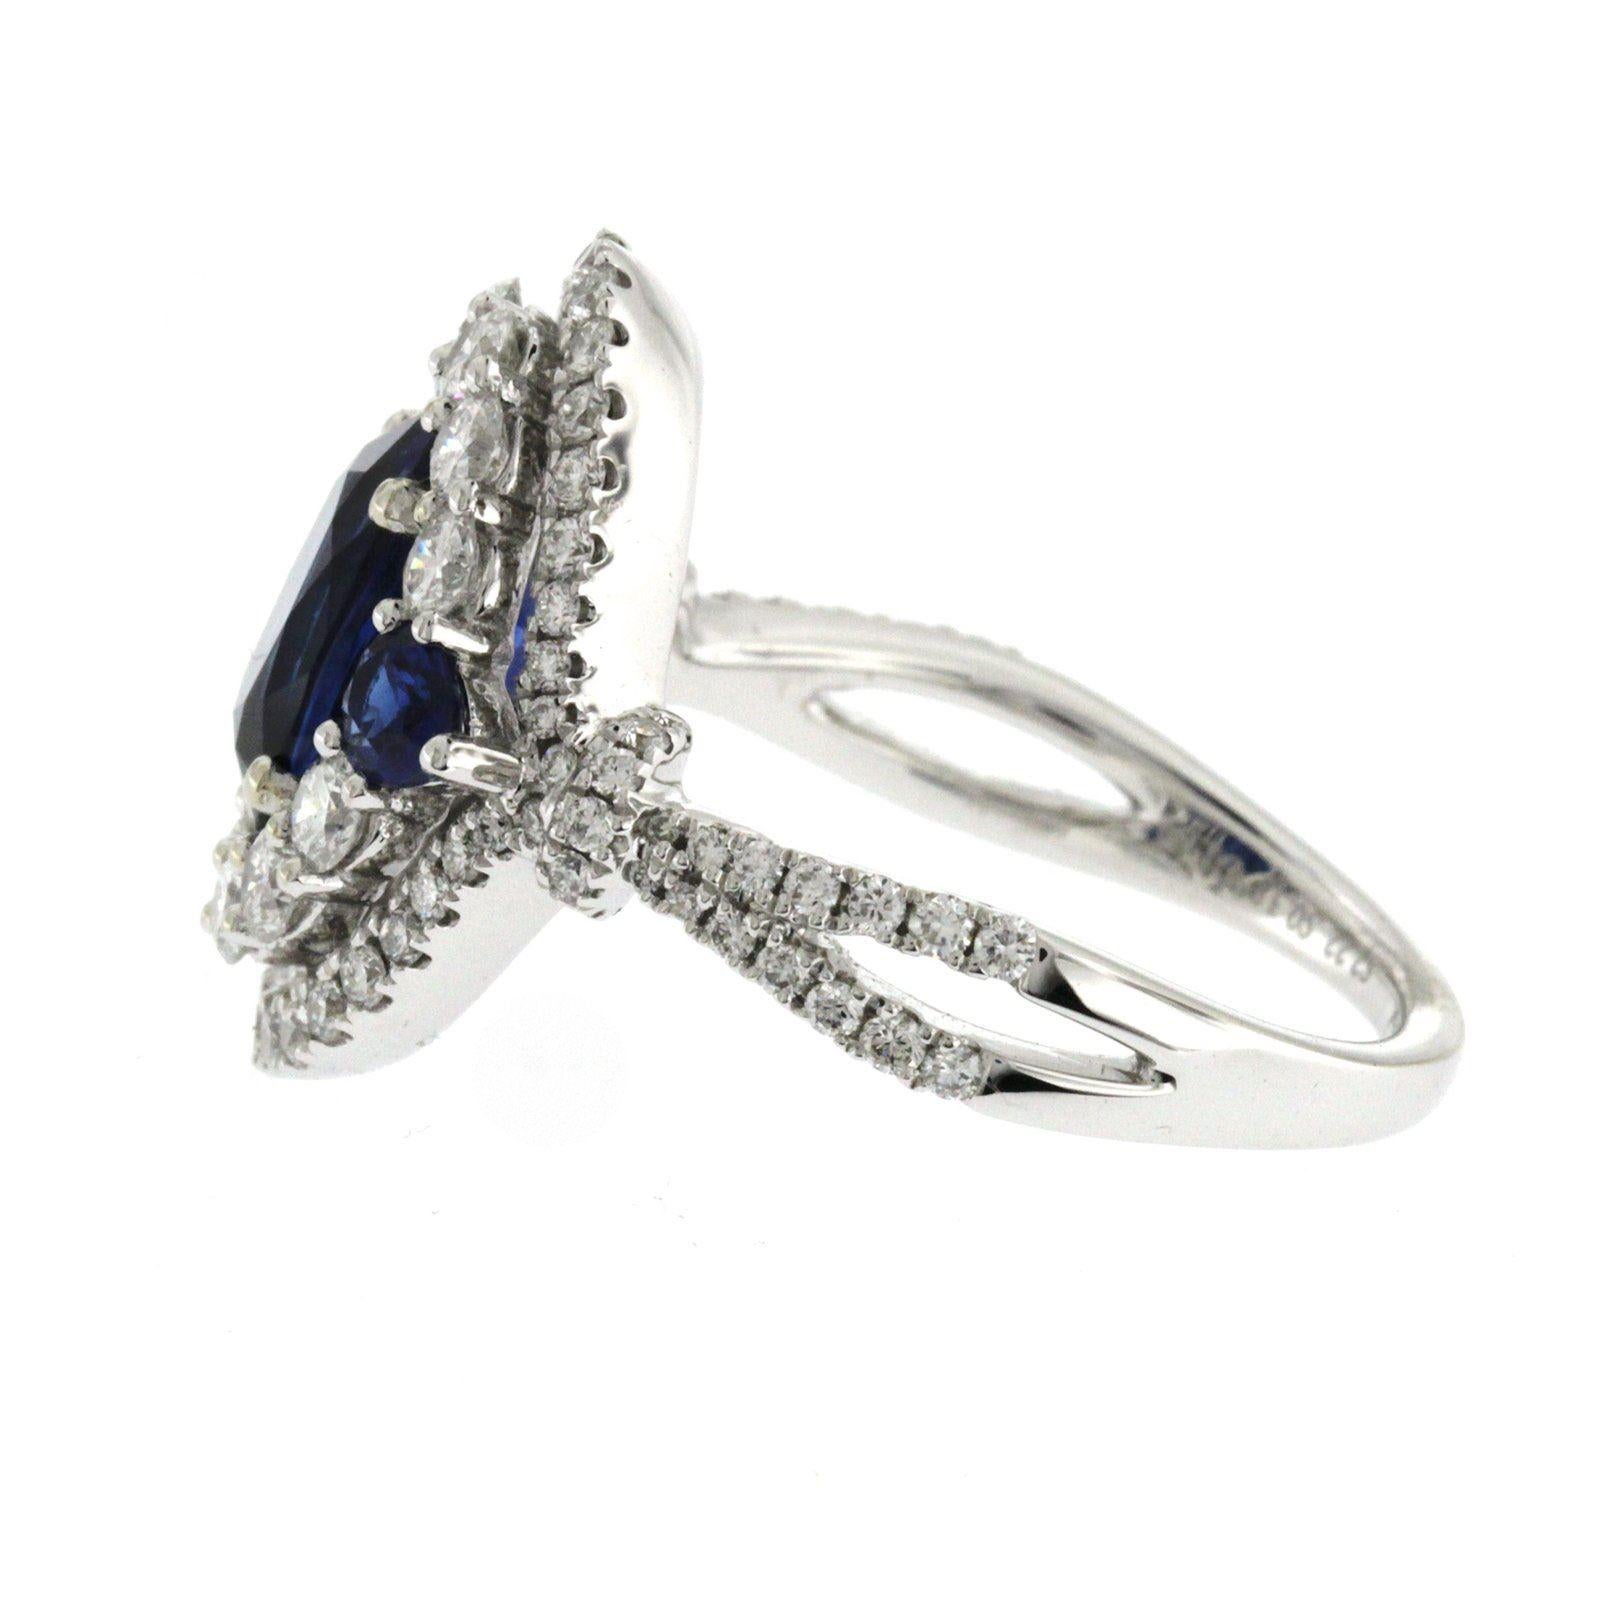 2.57 CT Ceylon Sapphires & 1.09 CT Diamonds in 18K White Gold Engagement Ring For Sale 1